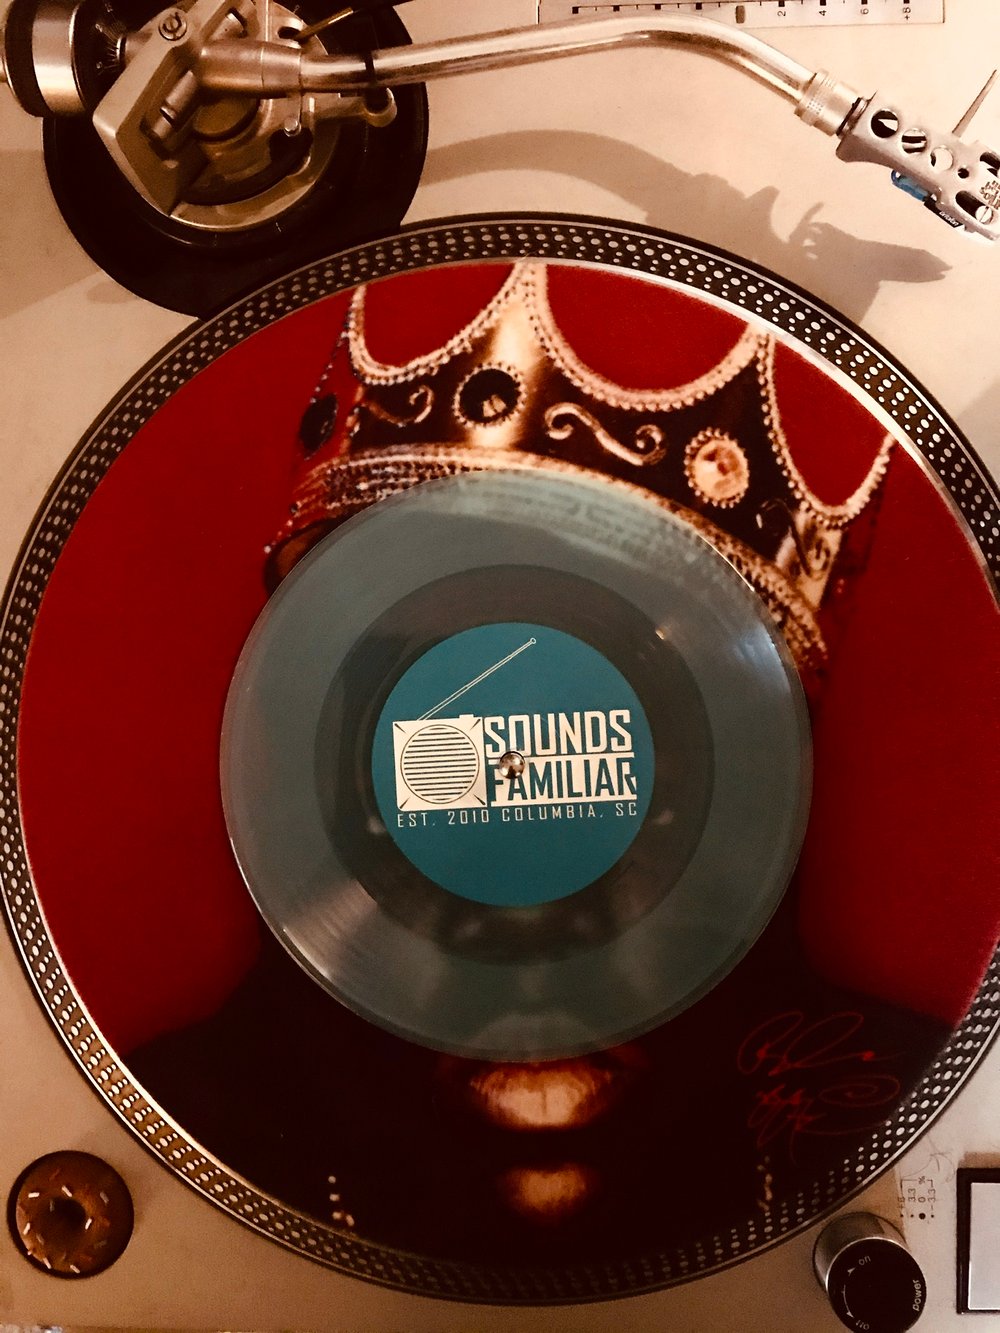 Analog (Preach Jacobs & Dose) - Baptized/She Know the Words T (7" - Exclusive Blue Vinyl)